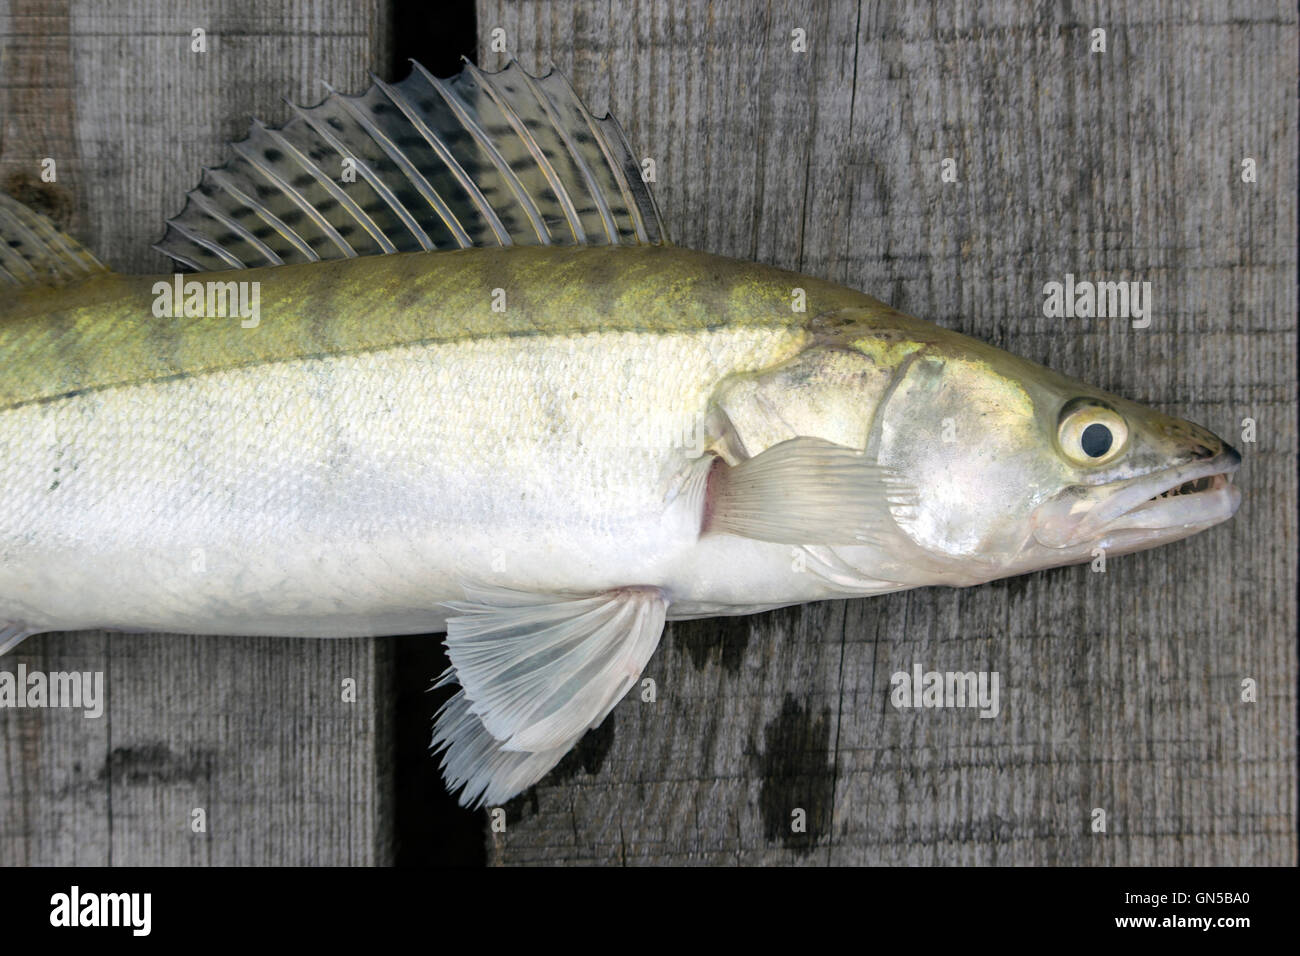 Danube, Serbia - Pikeperch (Sander lucioperca) on a wooden deck just before release Stock Photo